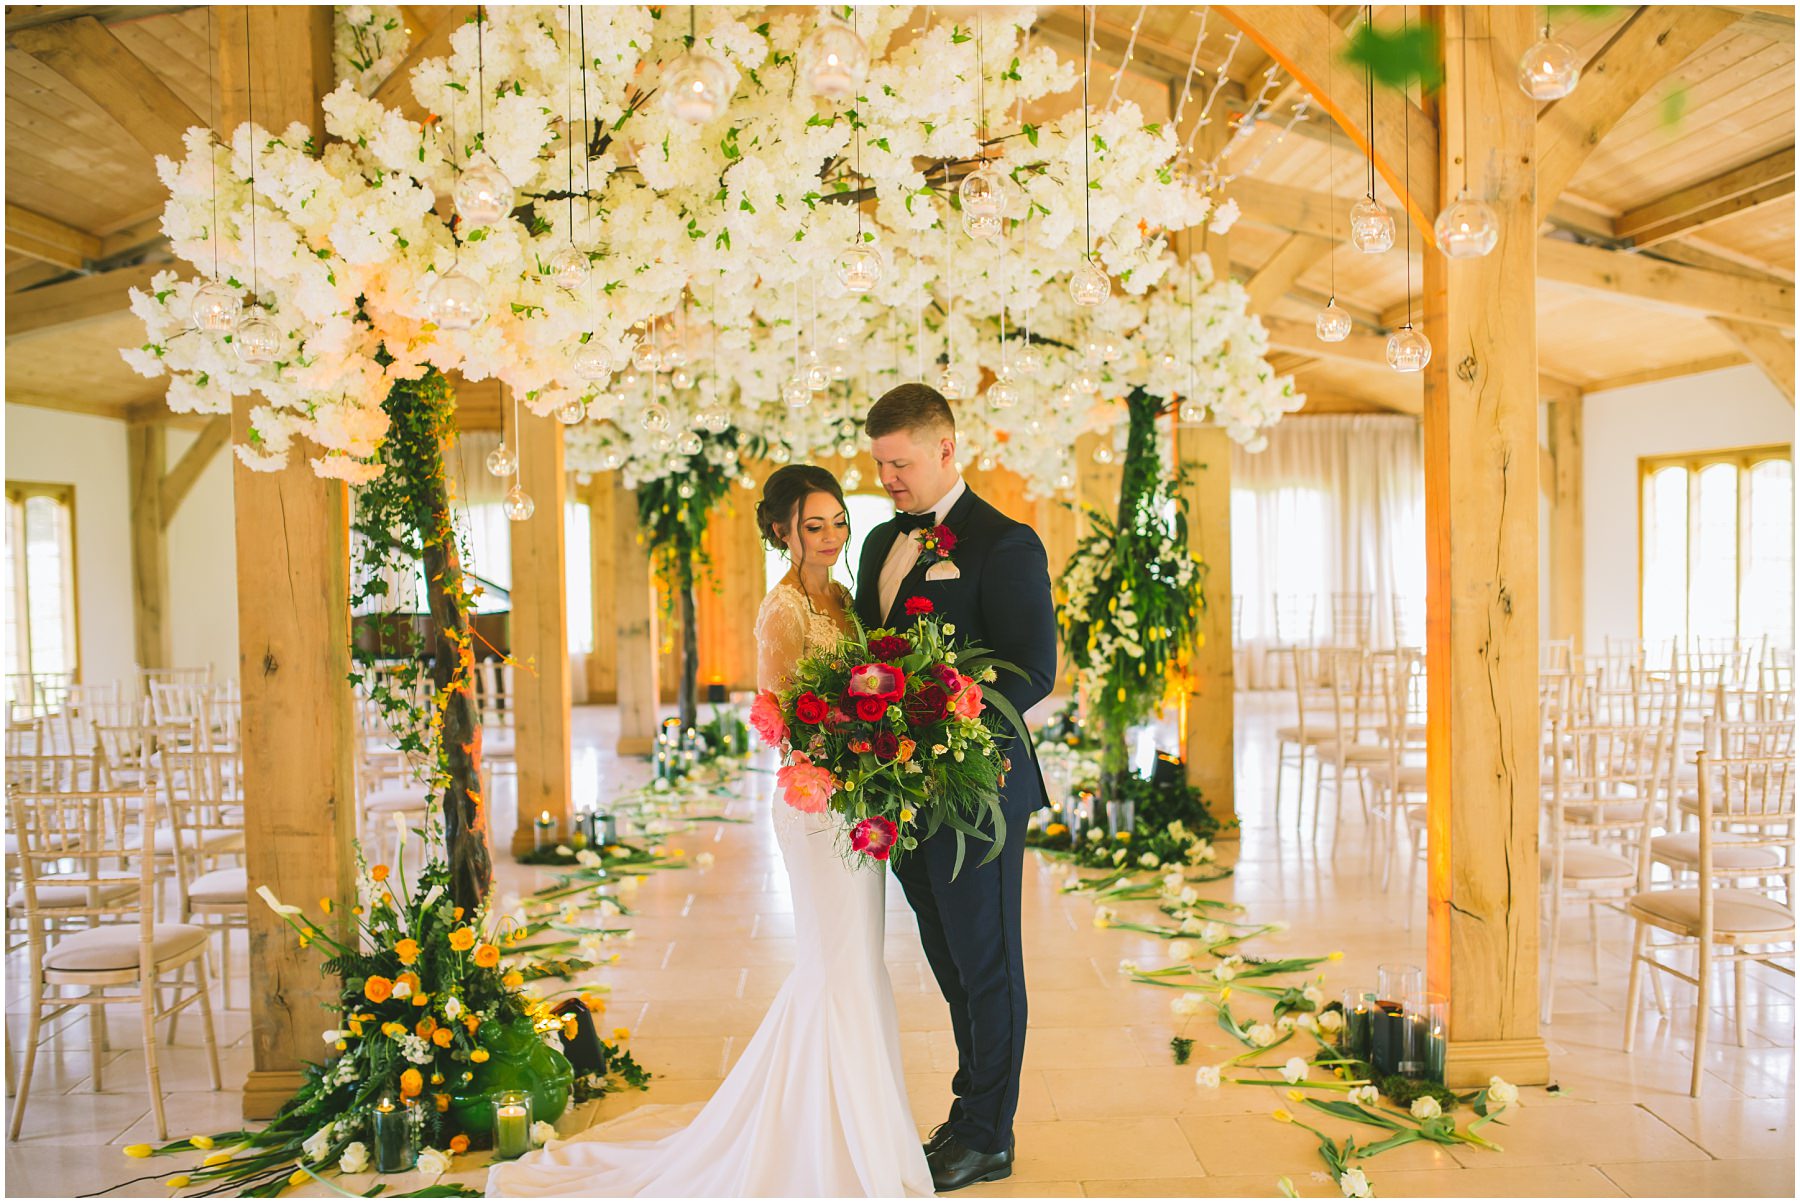 Inside the ceremony room at Colshaw Hall decorated by Red Floral Architecture